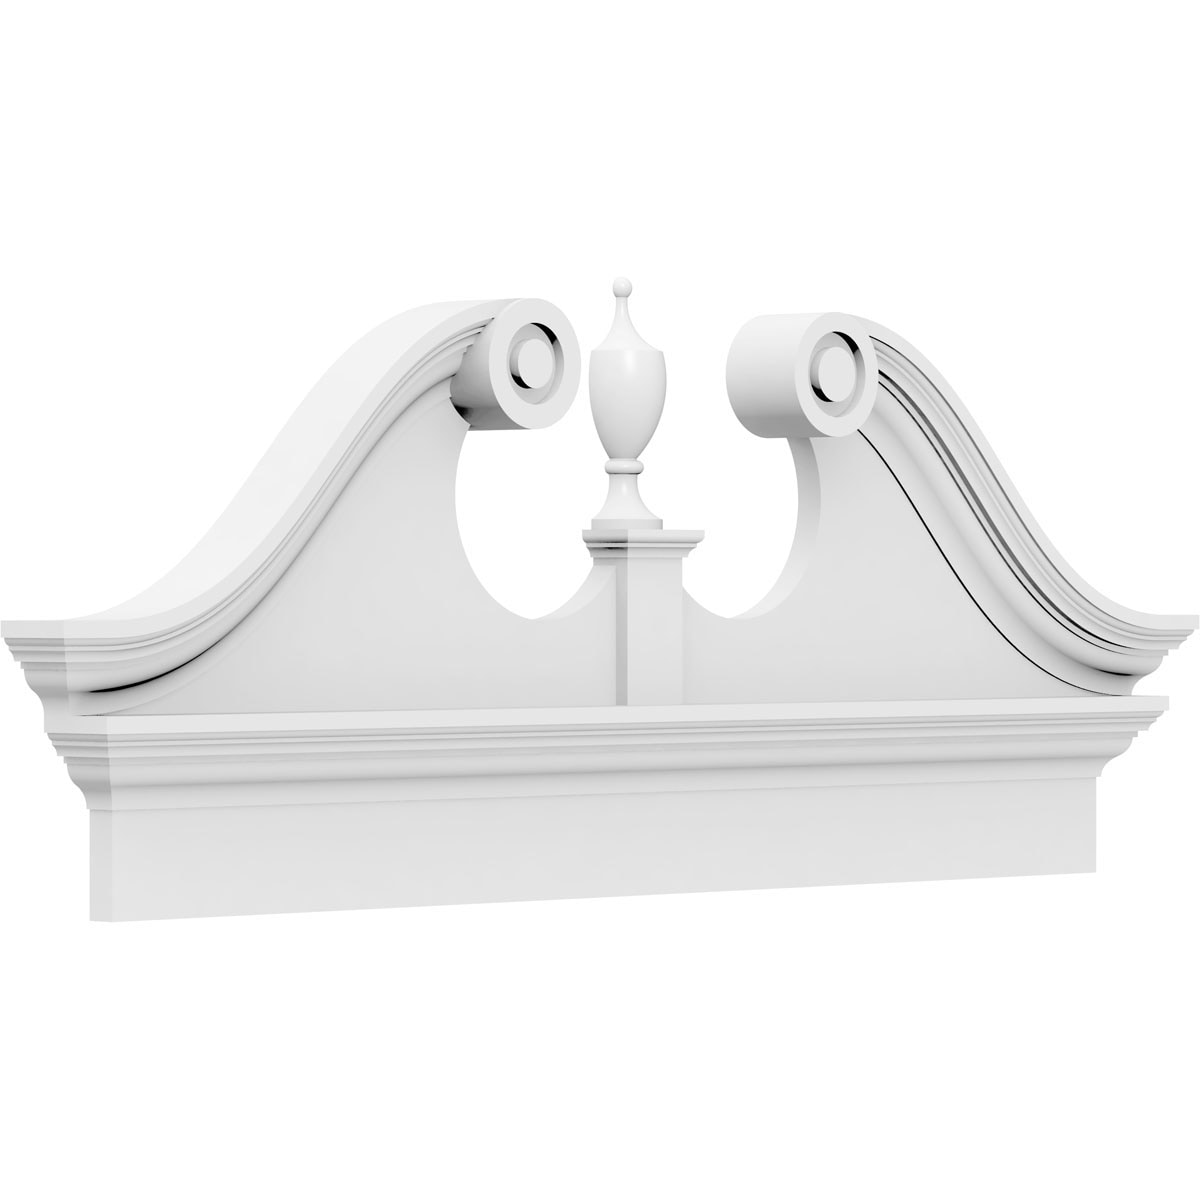 Ekena Millwork Rams Head 44-in x 17-7/8-in Unfinished PVC Pediment Entry Door Casing Accent in White | PEDPC044X180RHP00